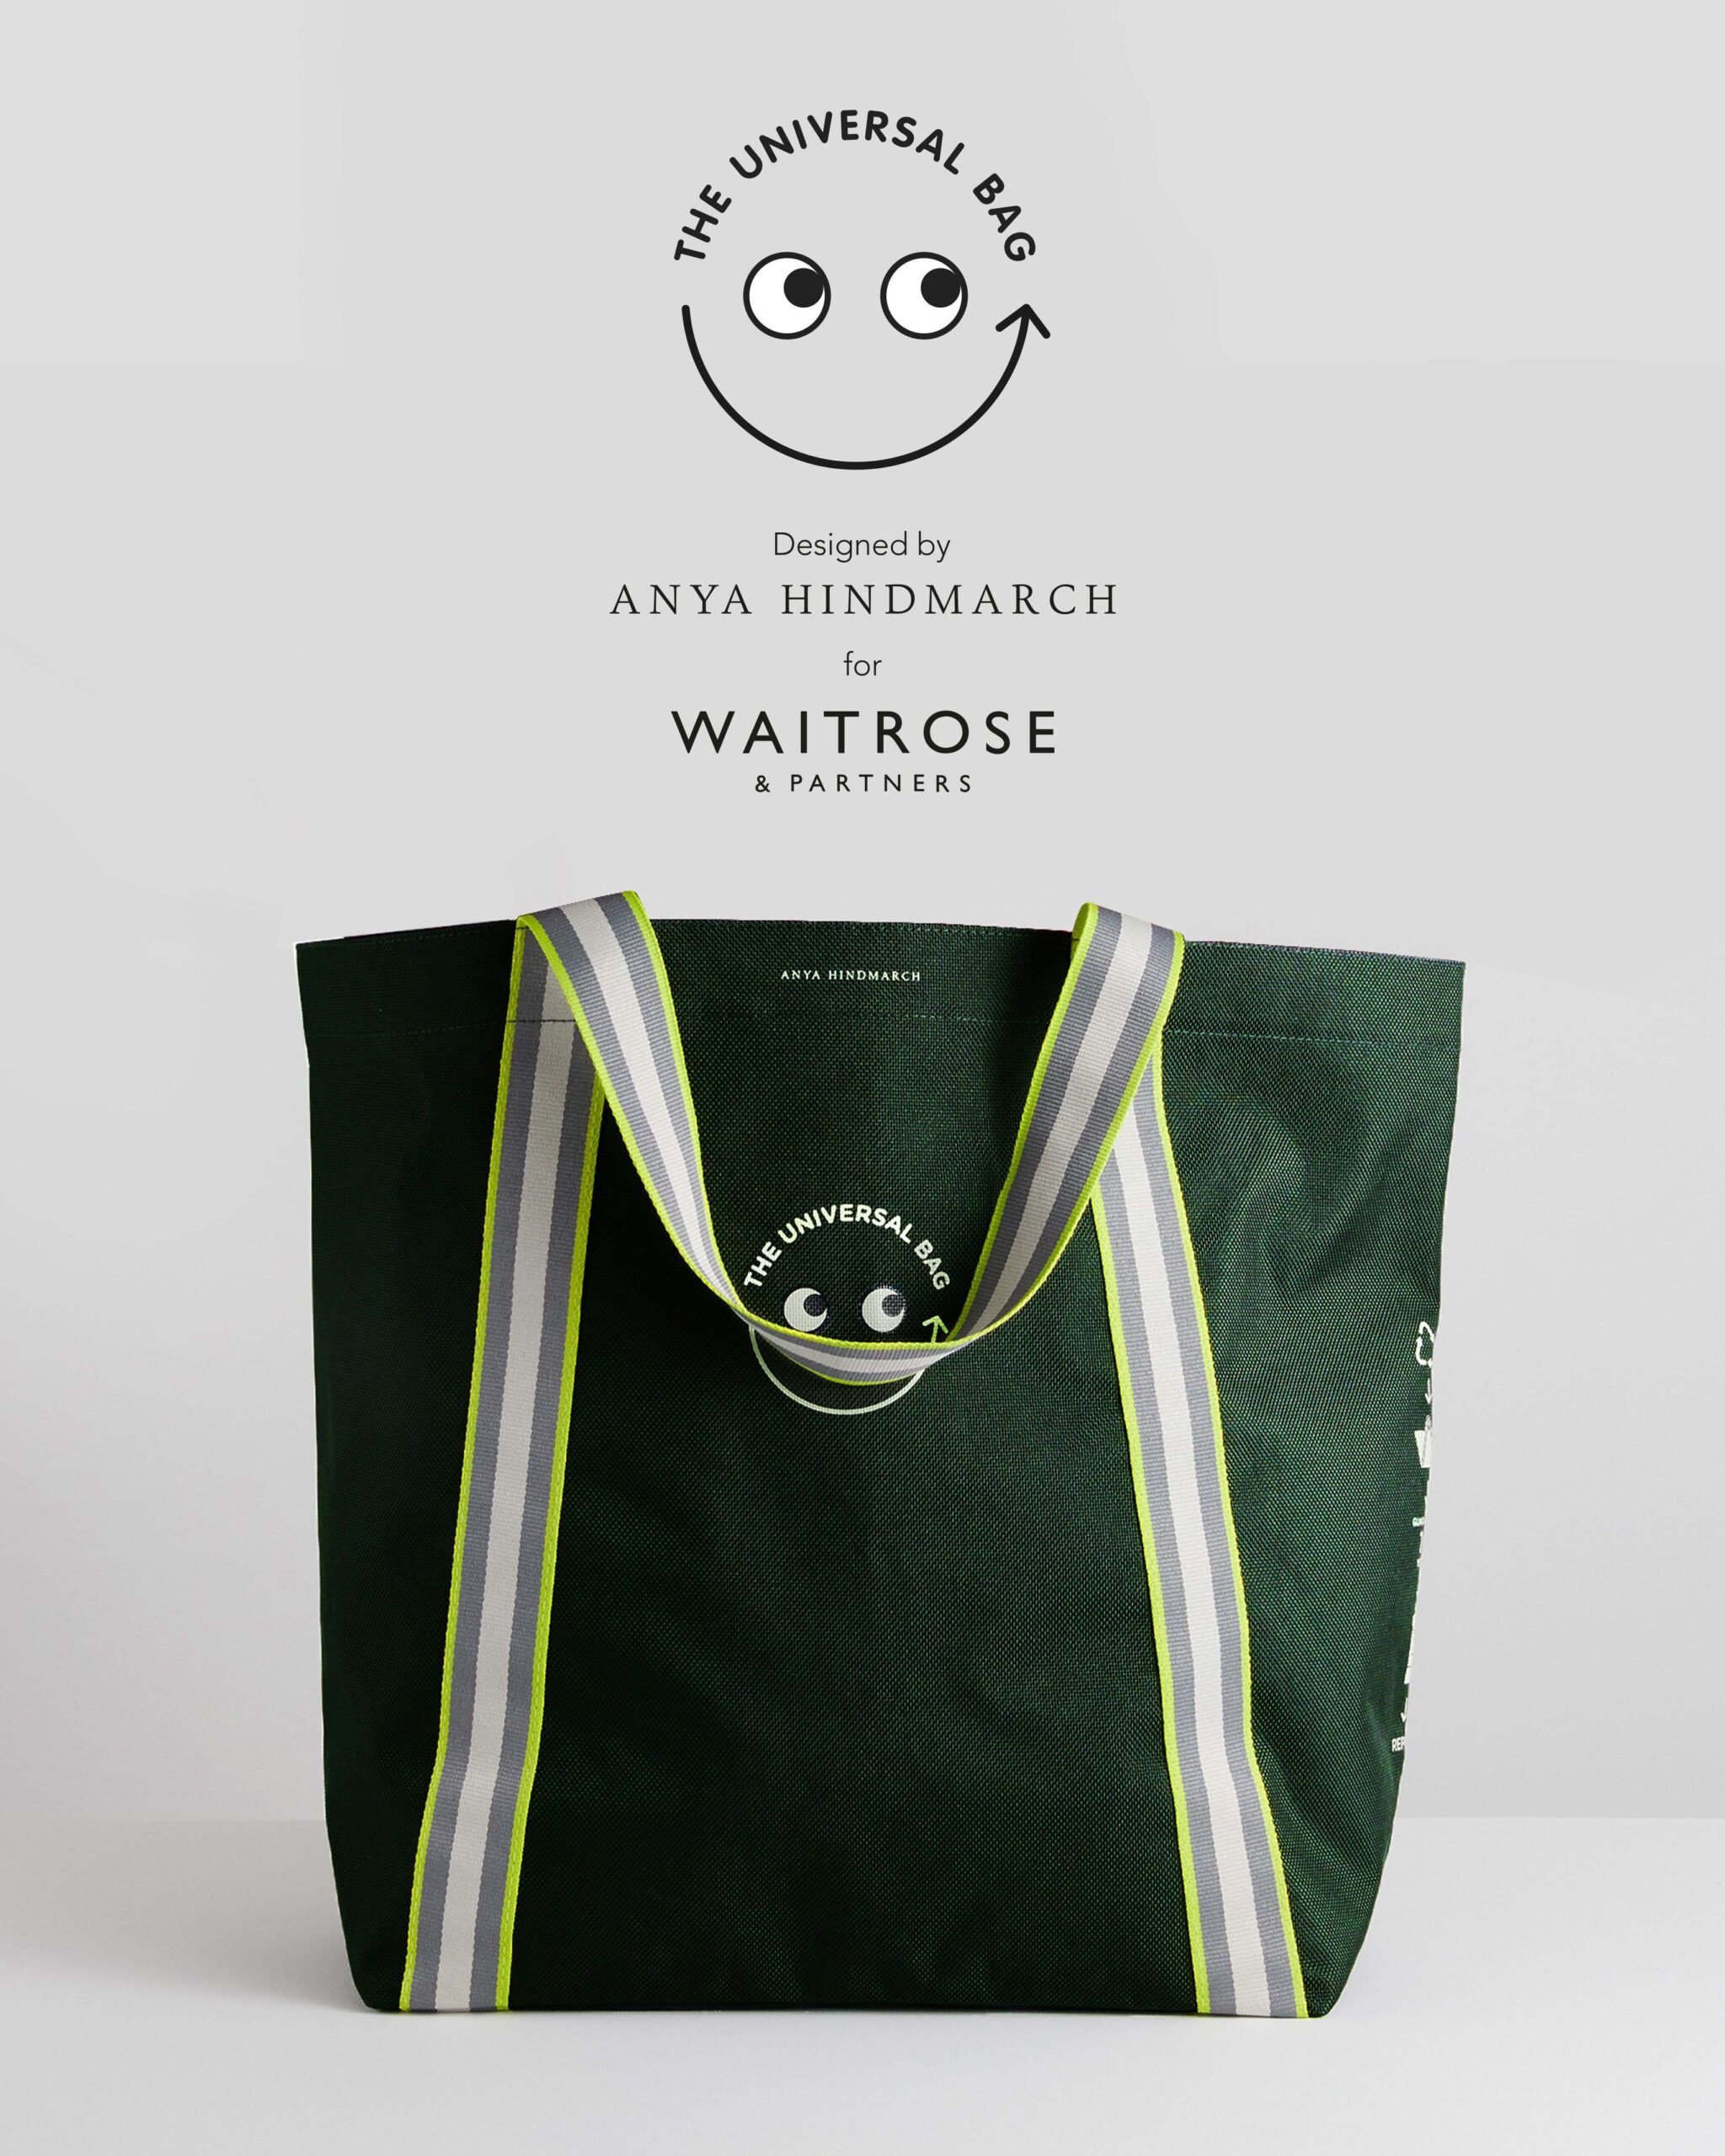 Anya Hindmarch teams up with Waitrose to launch The Universal Bag